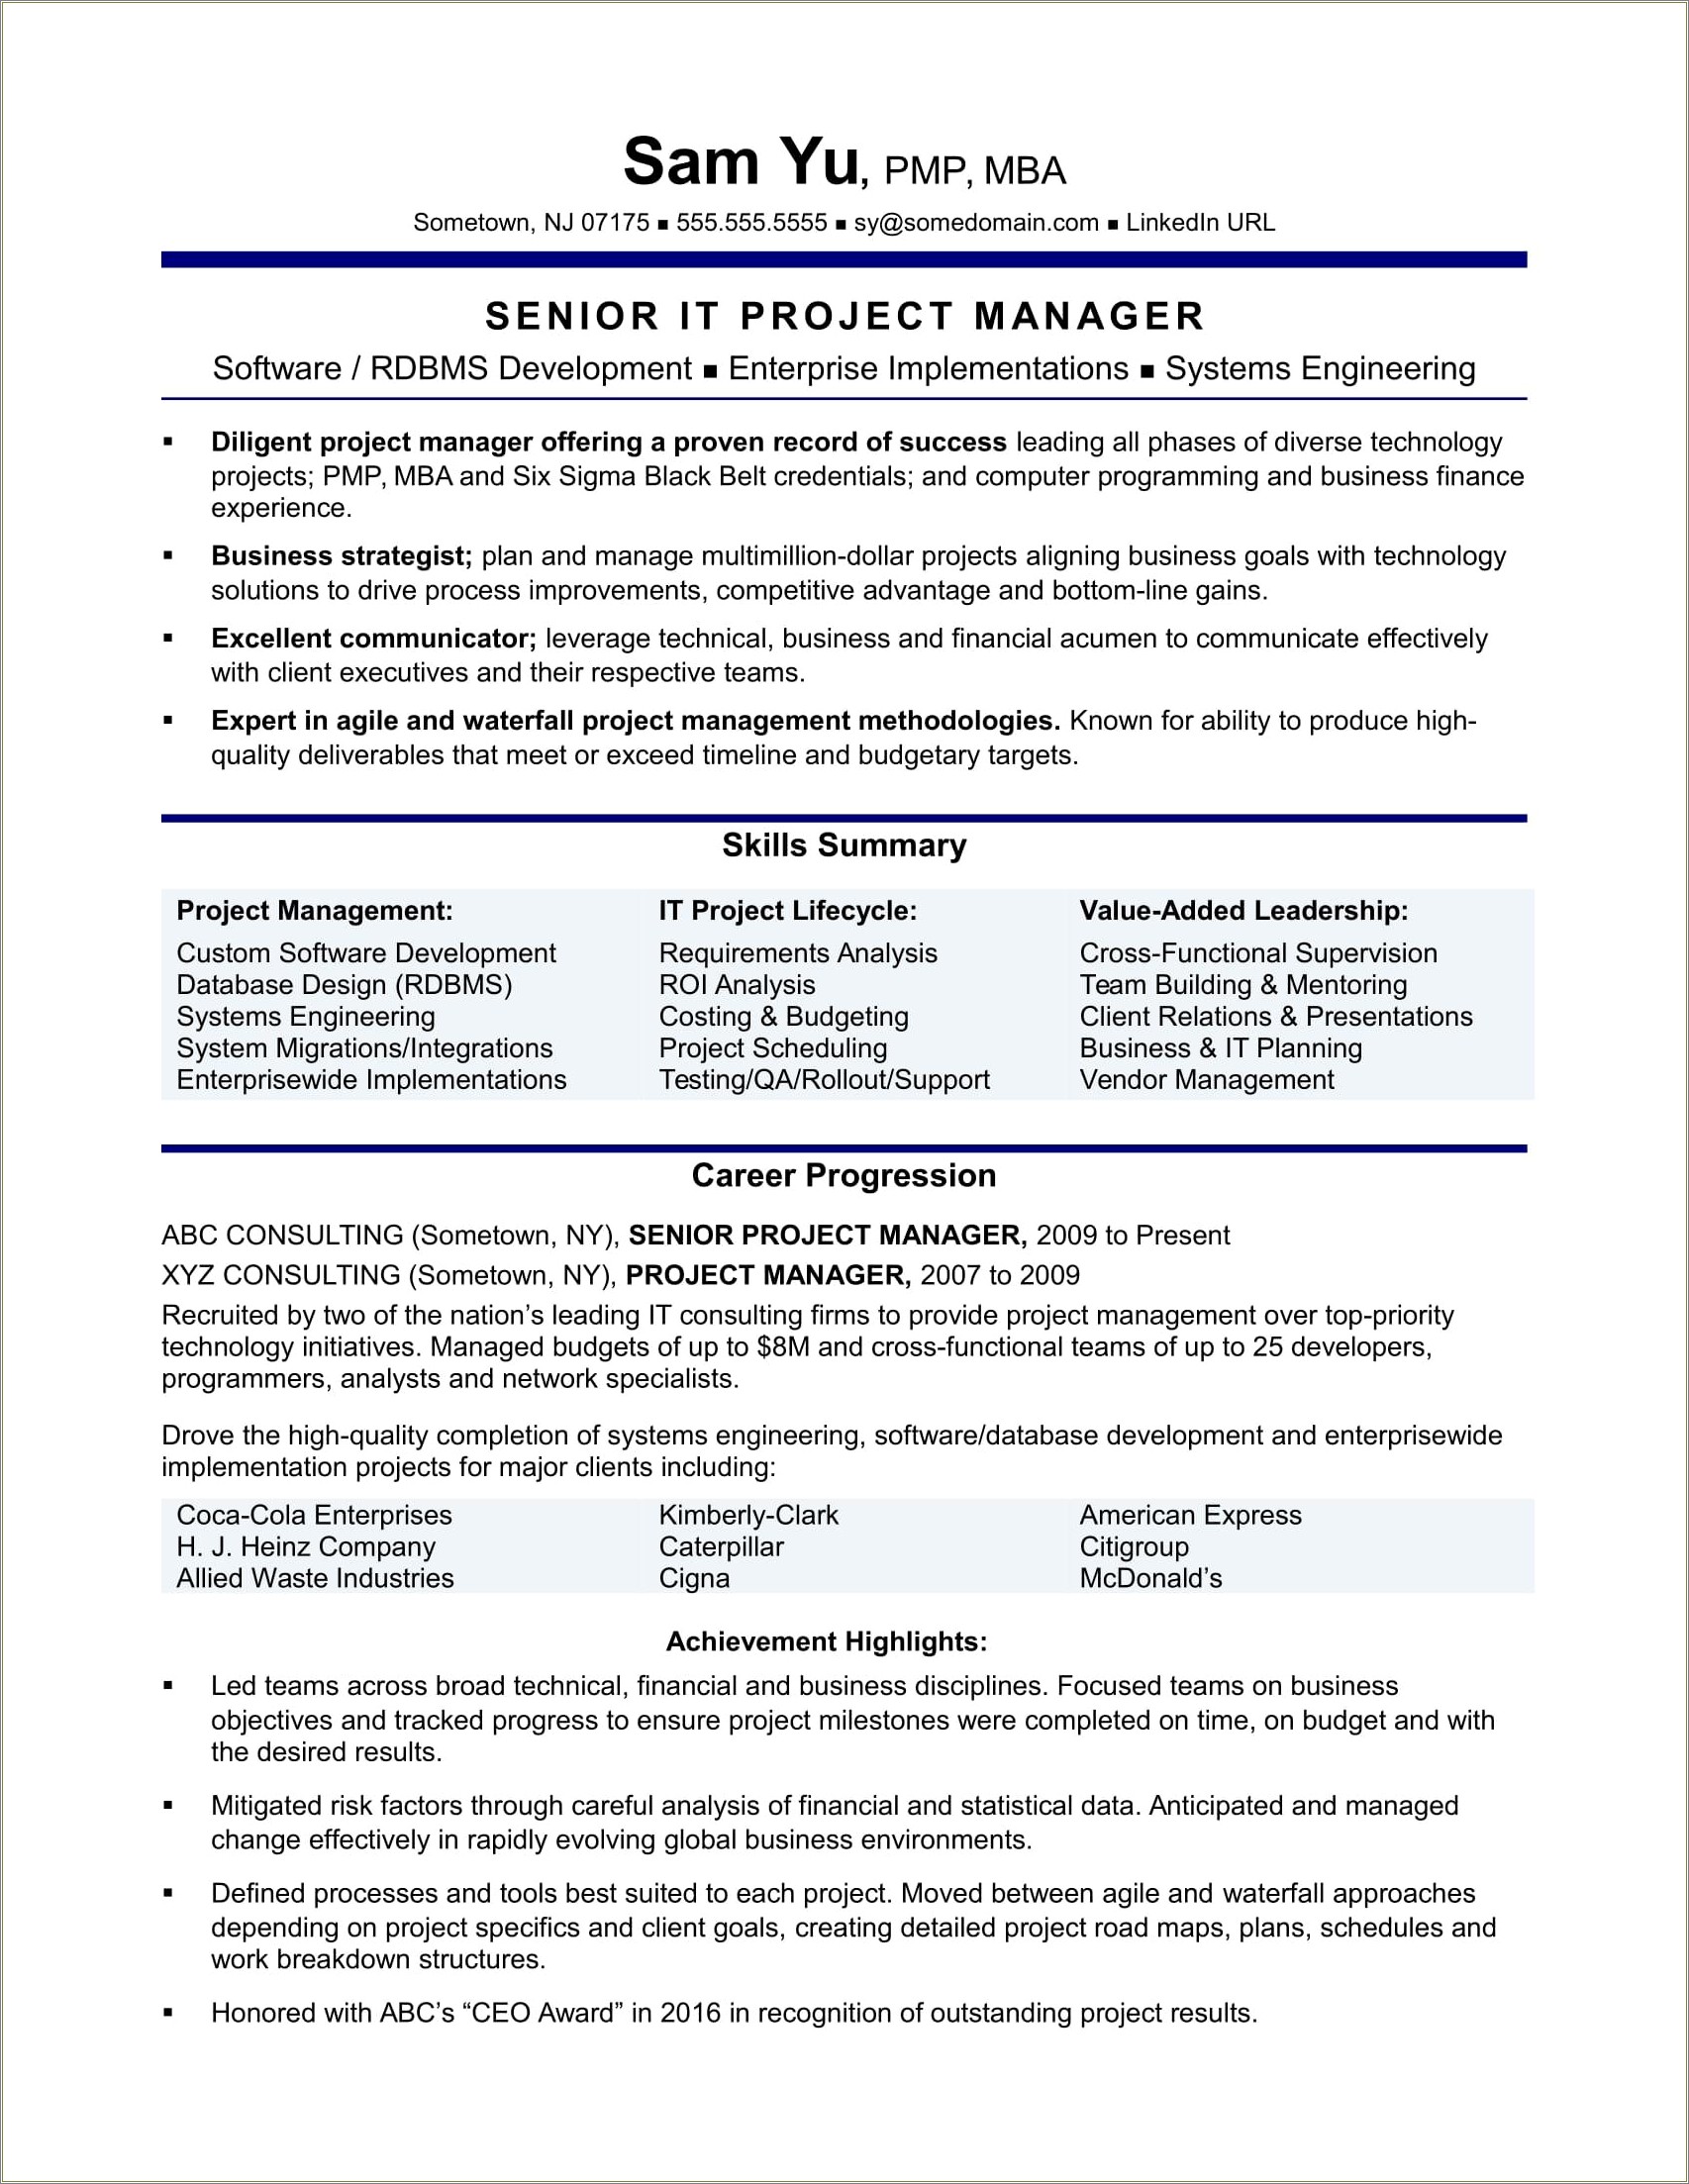 access-control-project-manager-resume-resume-example-gallery